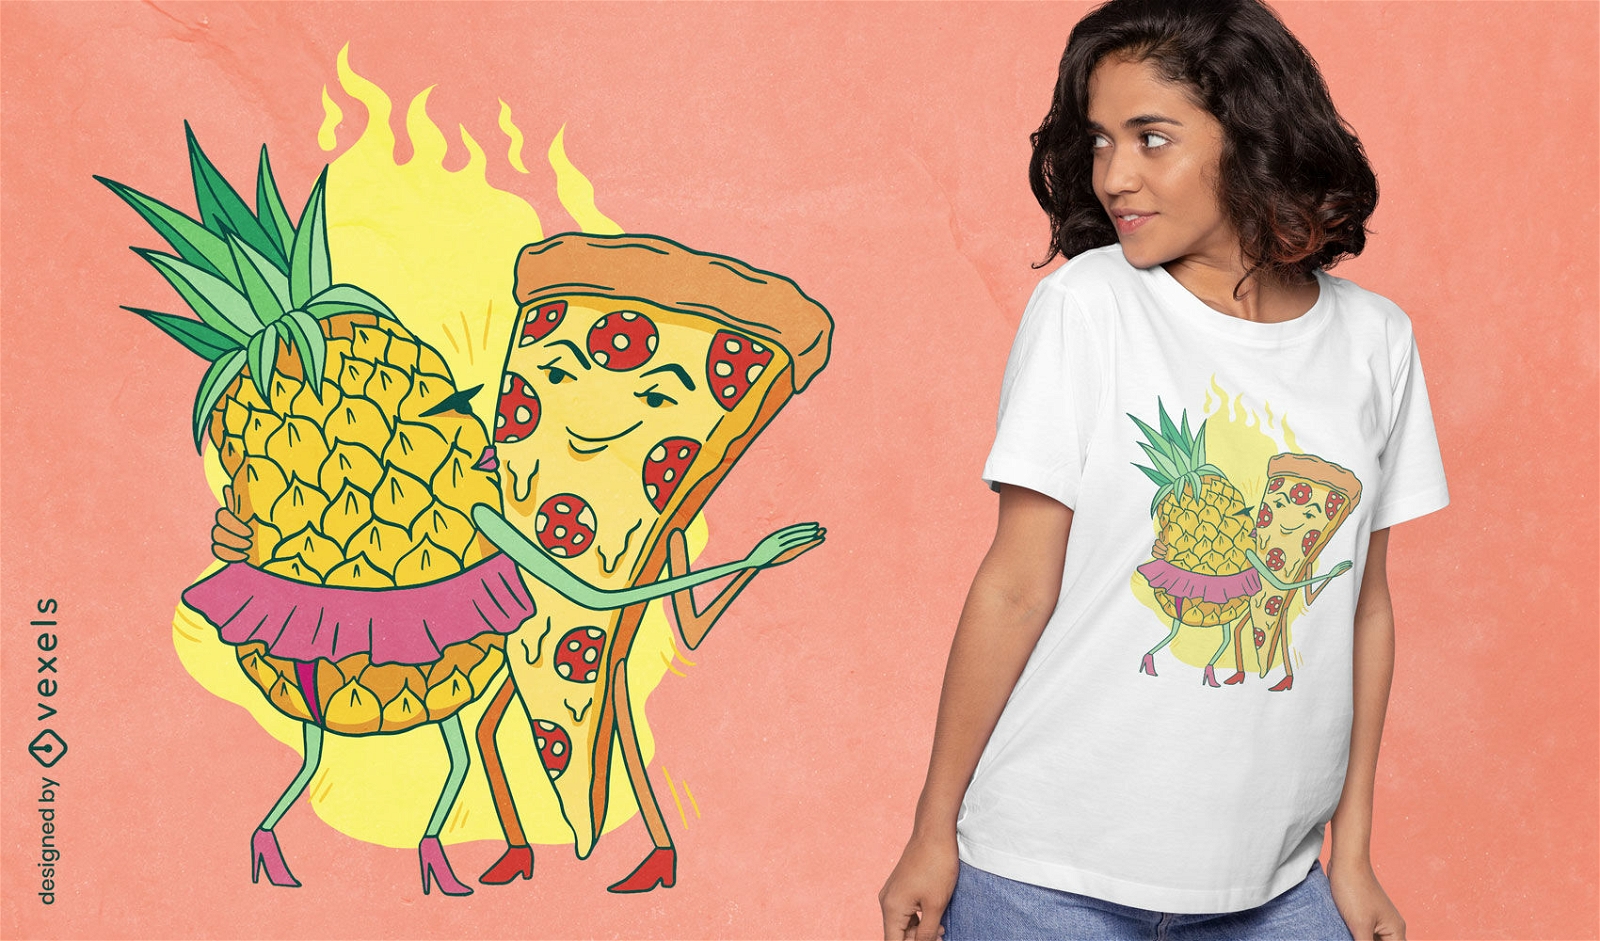 Pizza and pineapple dancing t-shirt design